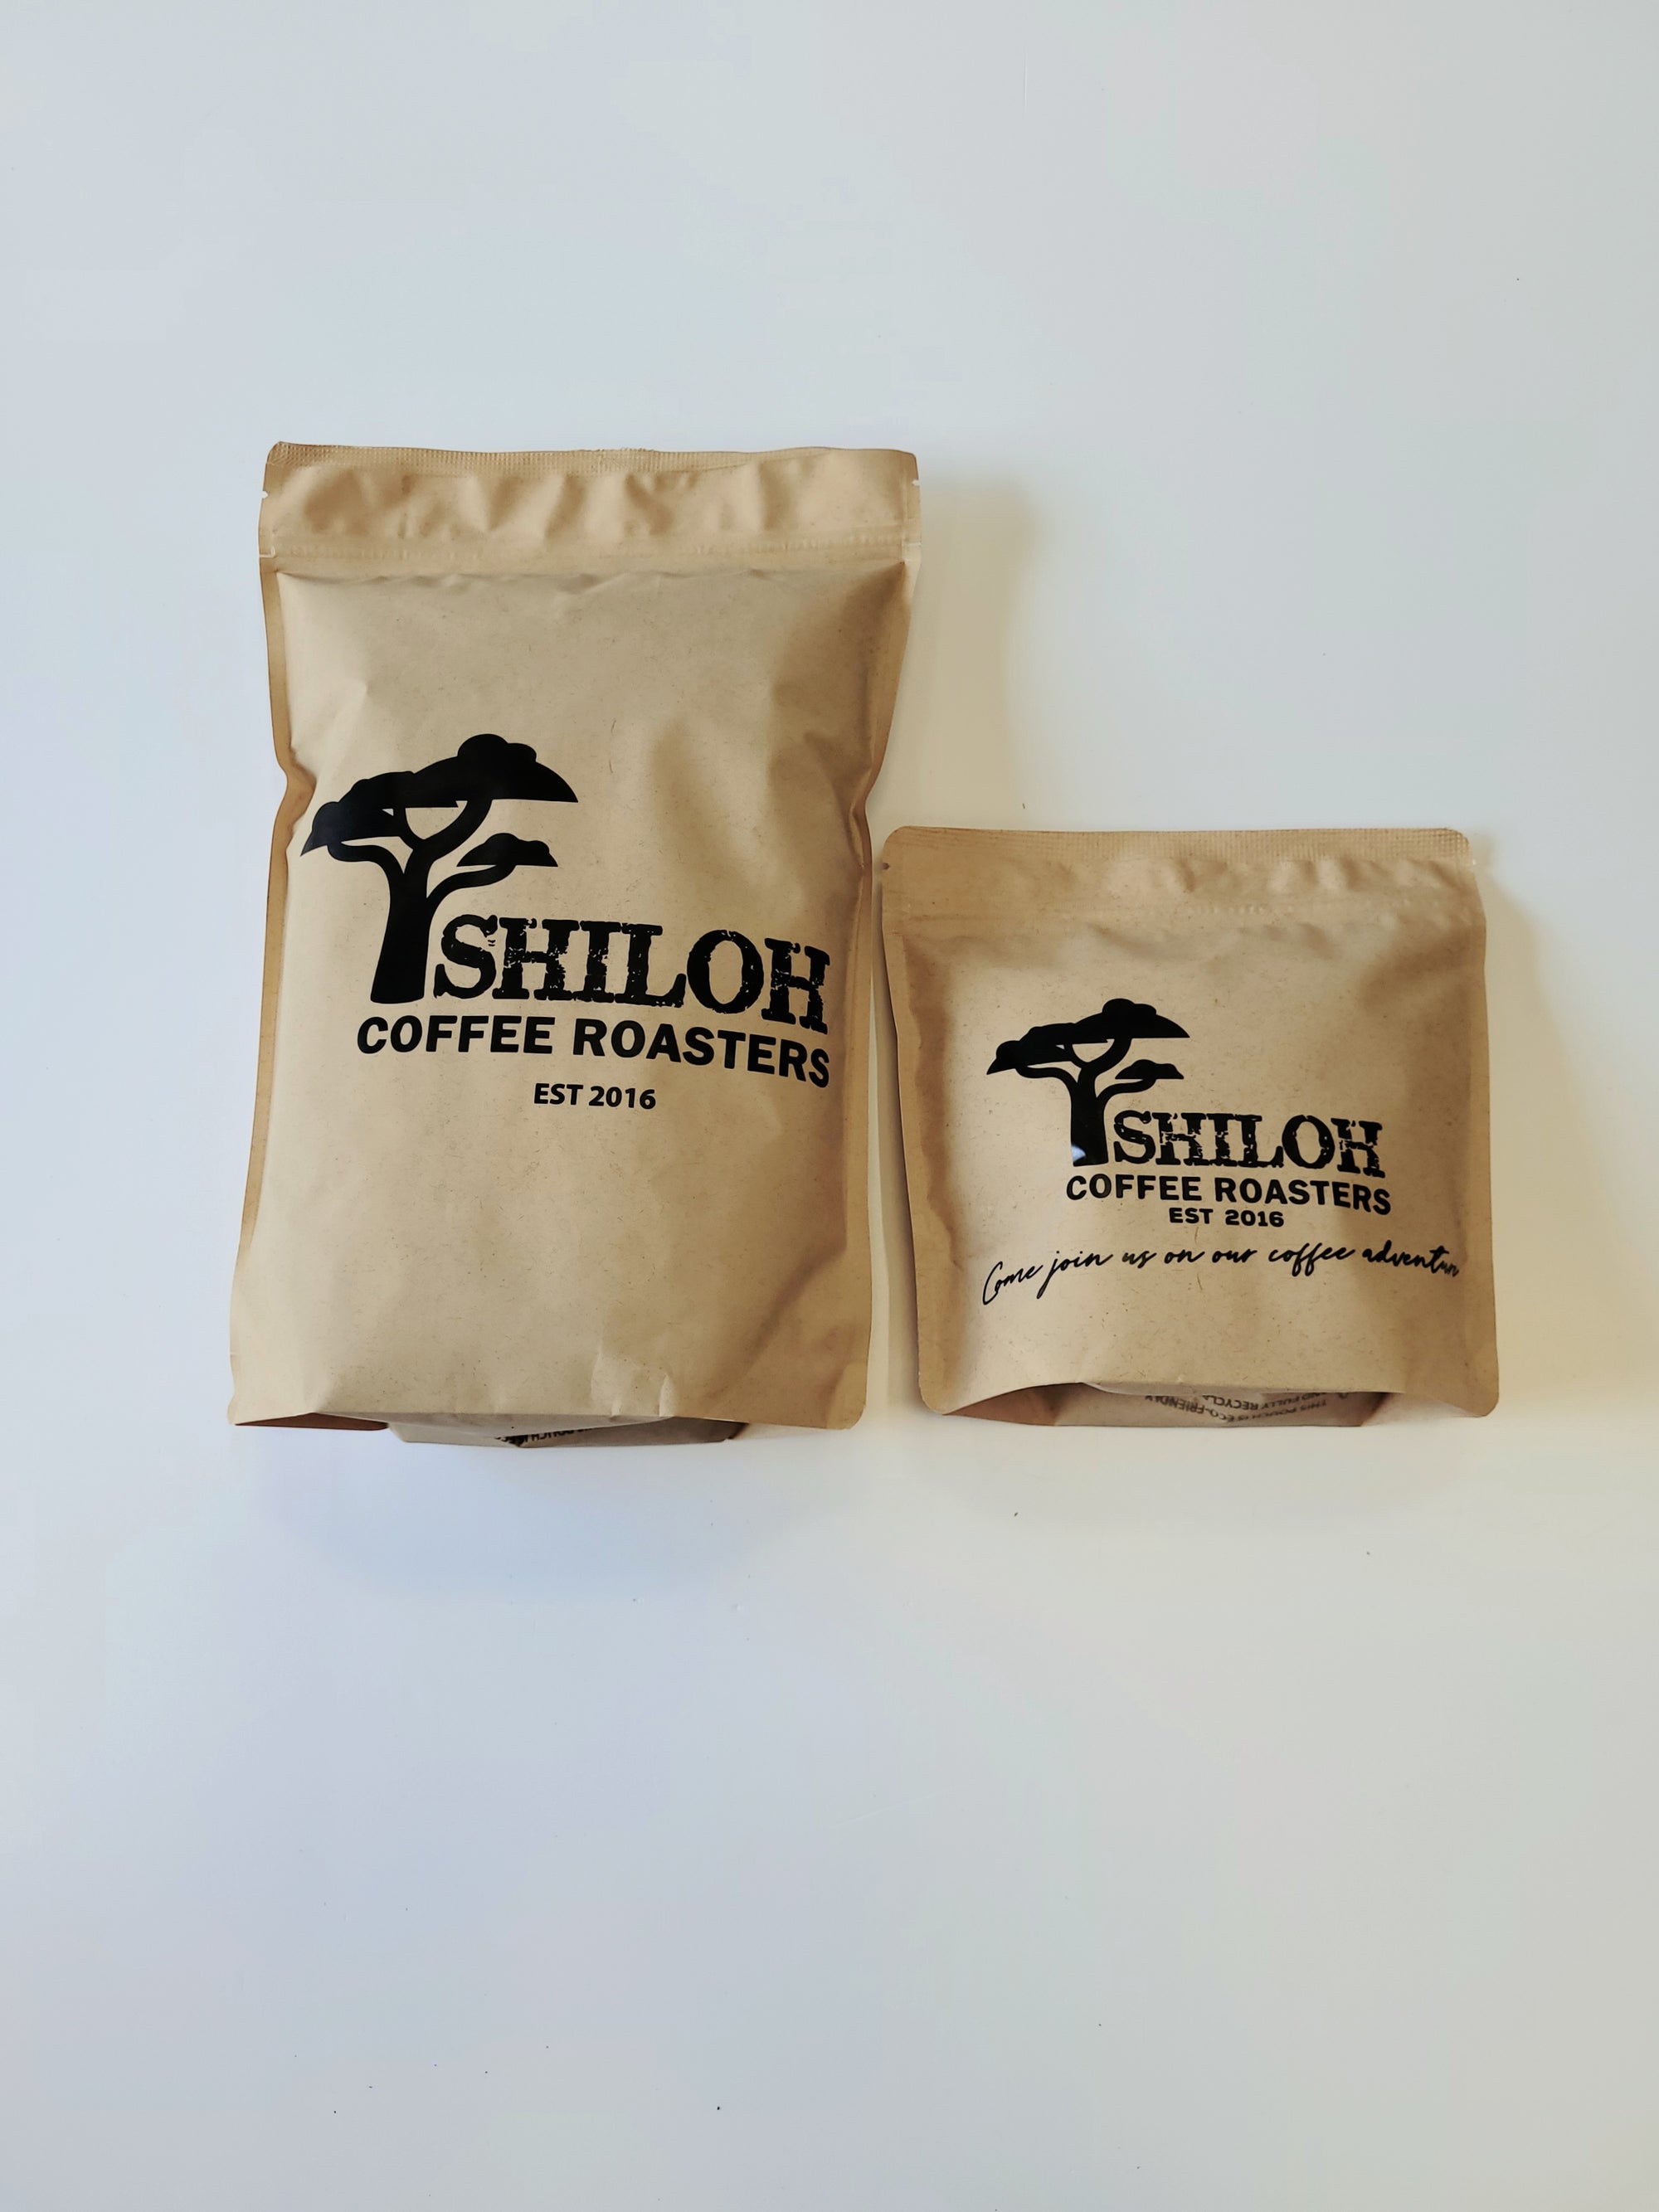 The Mills Blend Subscription